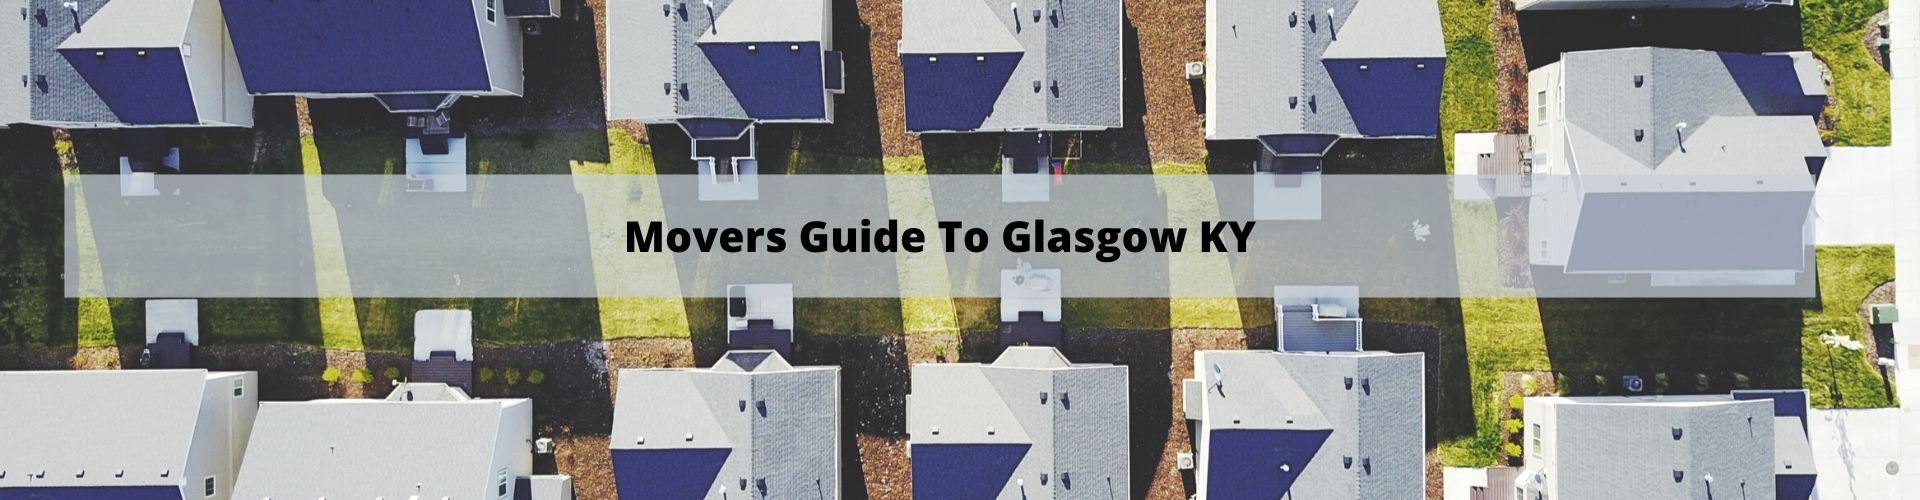 Movers Guide to Glasgow KY